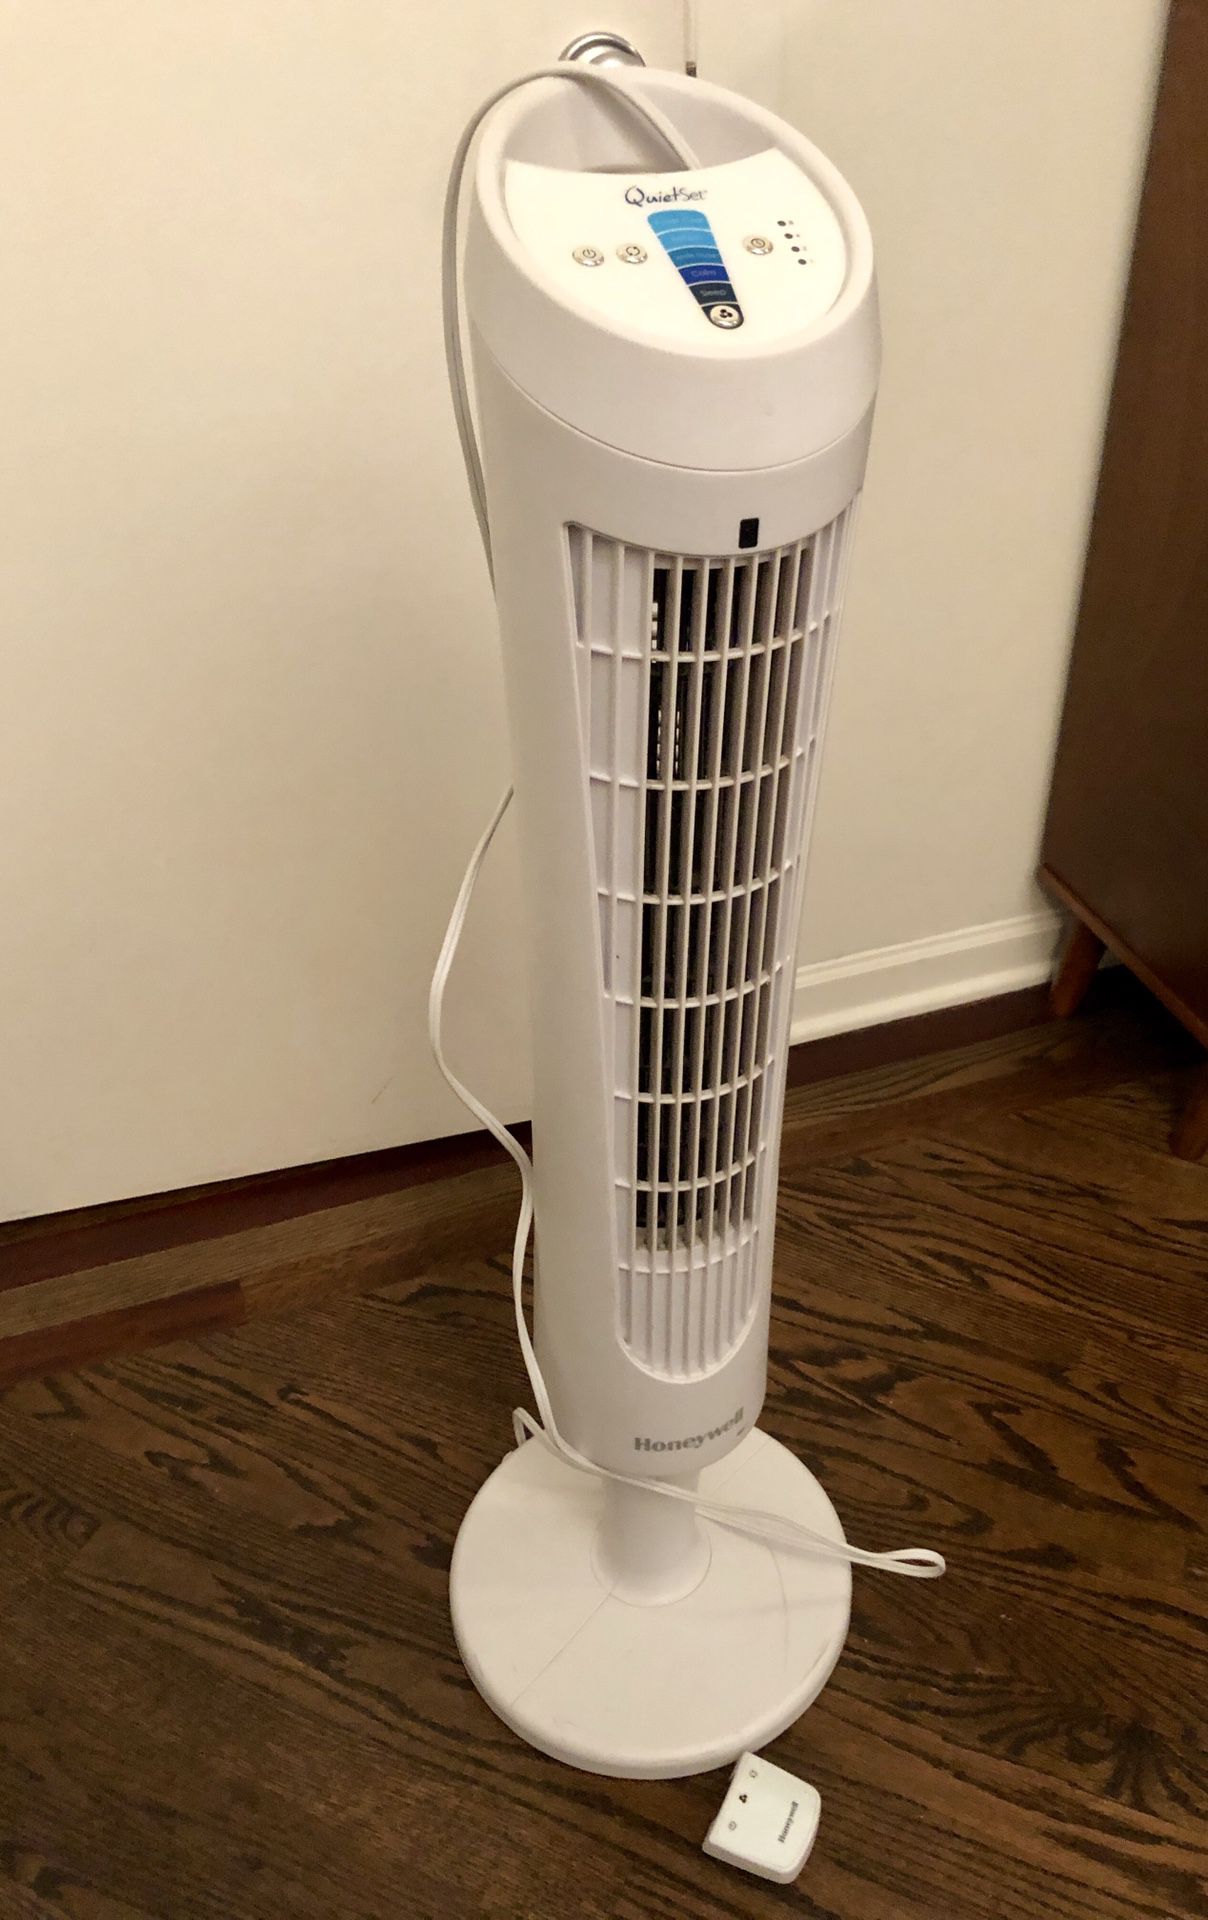 Honeywell tower fan with remote